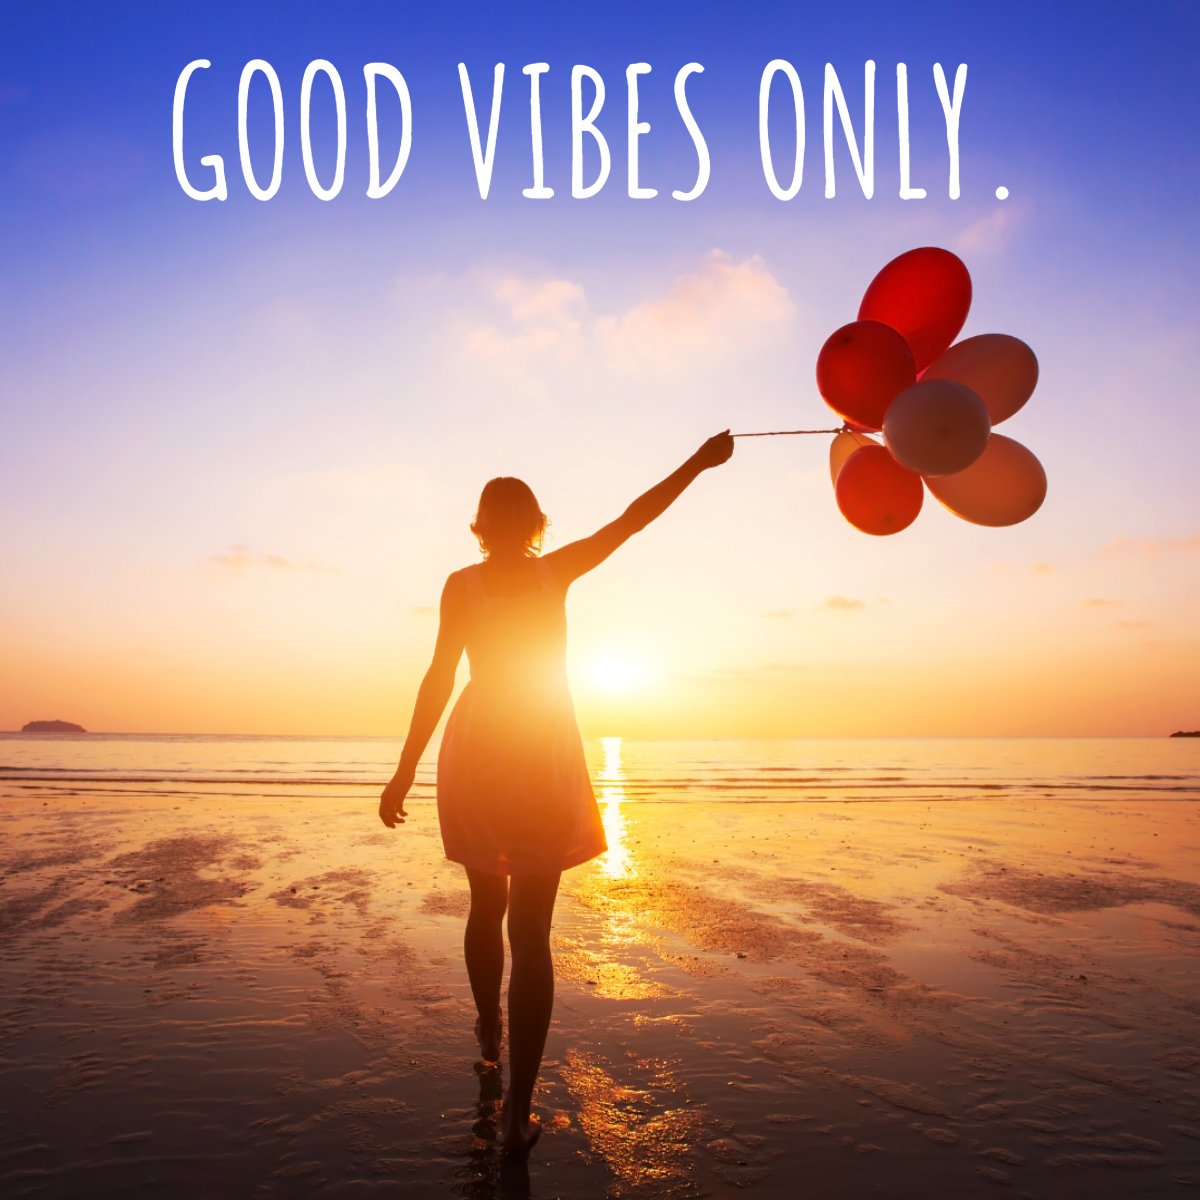 Good Vibes Only...🙆✌️

#goodvibesonly✌️ #vibes #goodvibes #positivevibes #goodquote #goodenergyonly #instagood
 #OhioRealEstate #AkronRealtor #CantonRealtor